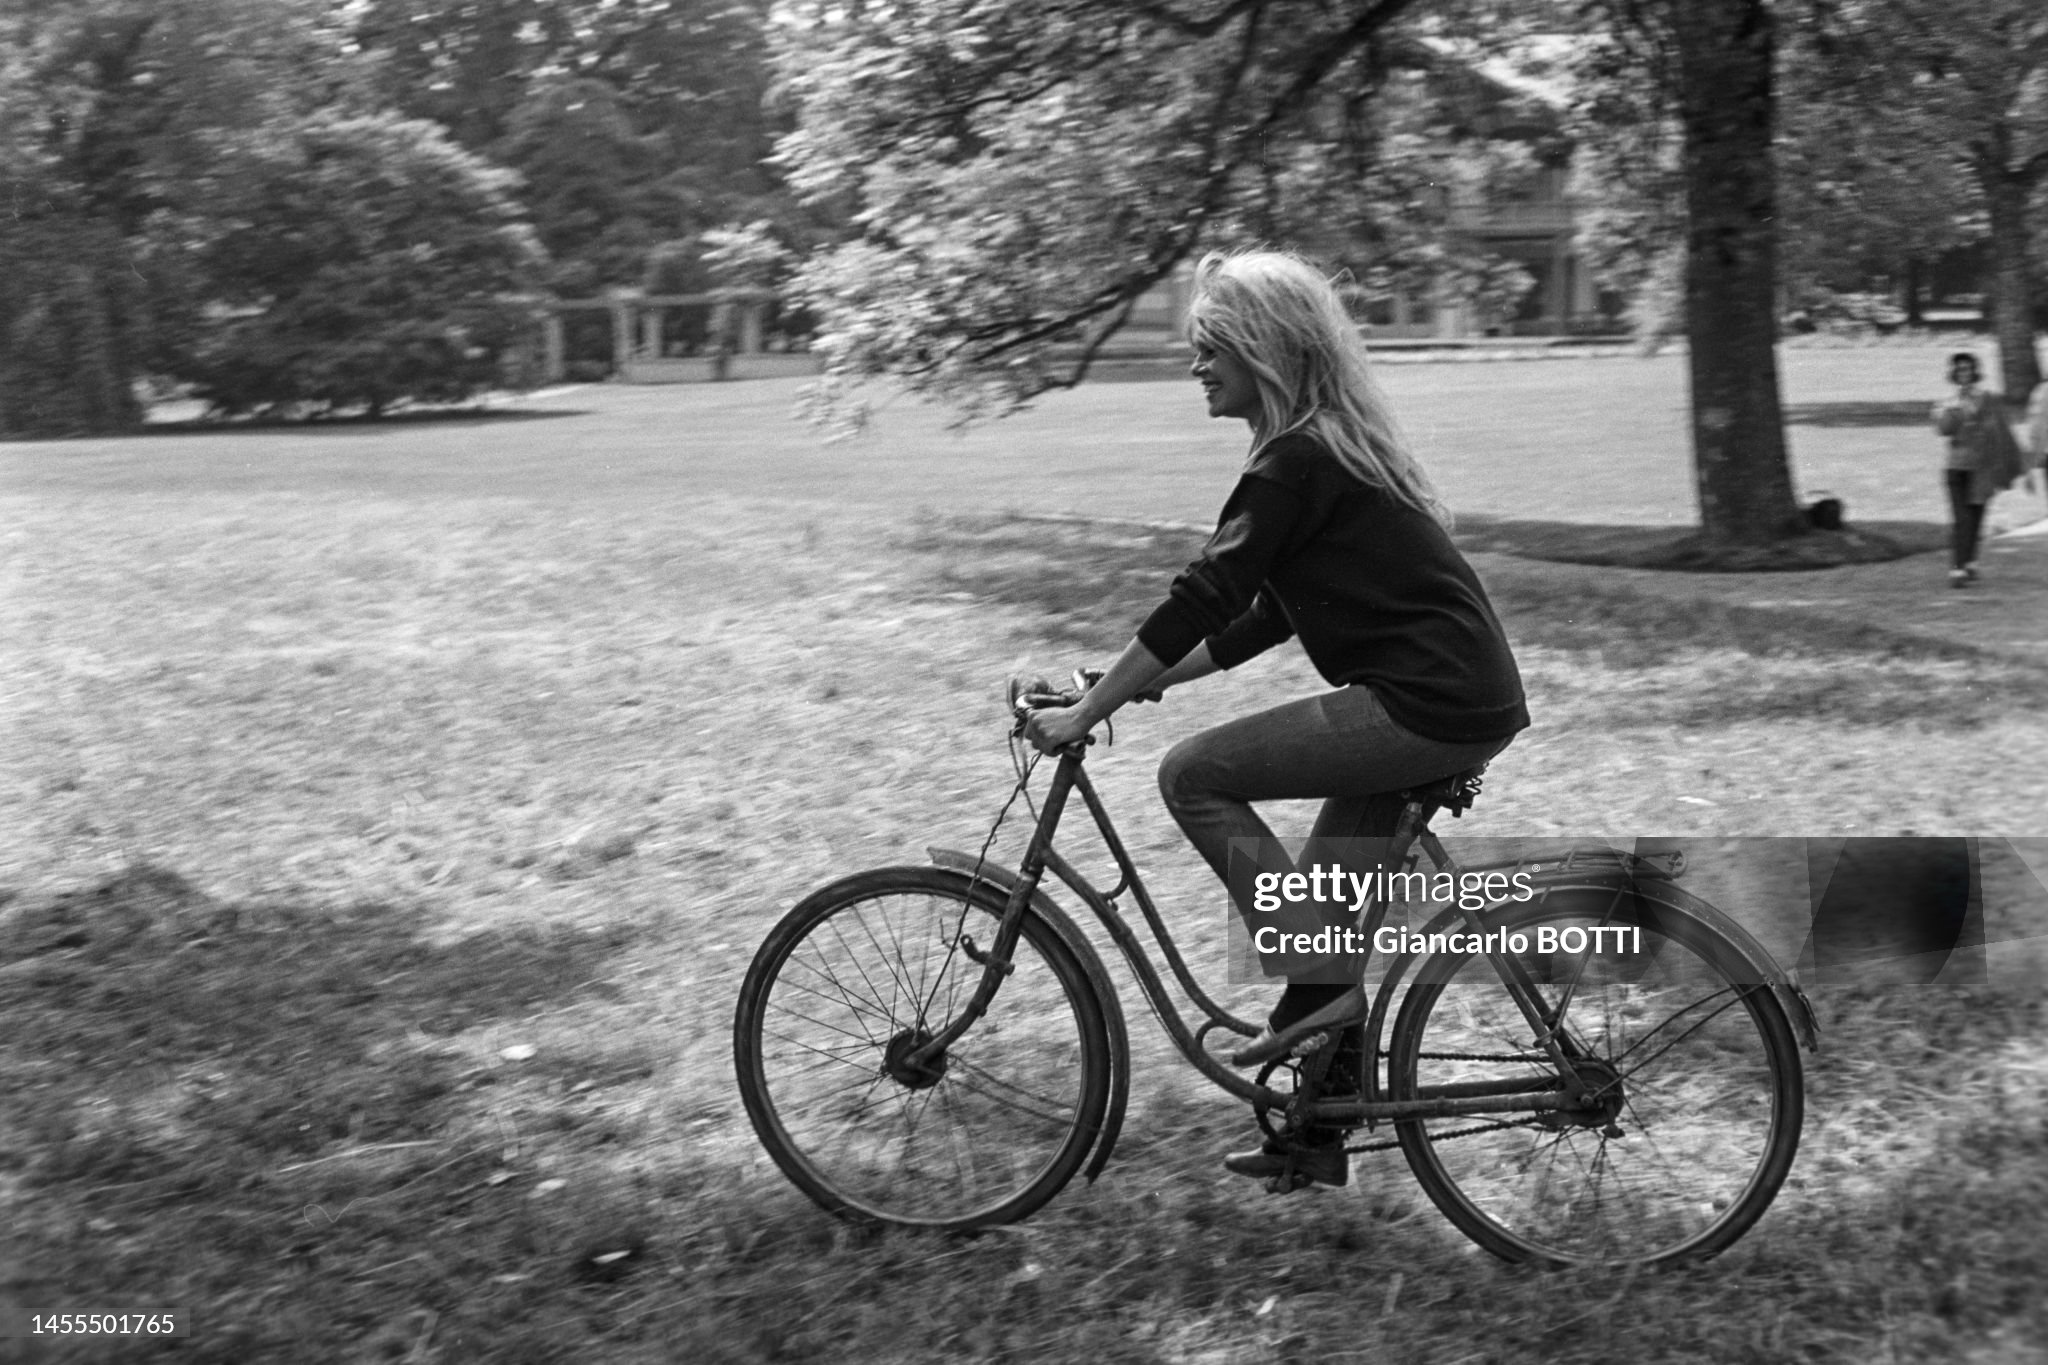 Brigitte Bardot riding a bike during the filming of the film 'Private life' in Saint-Tropez in 1961.